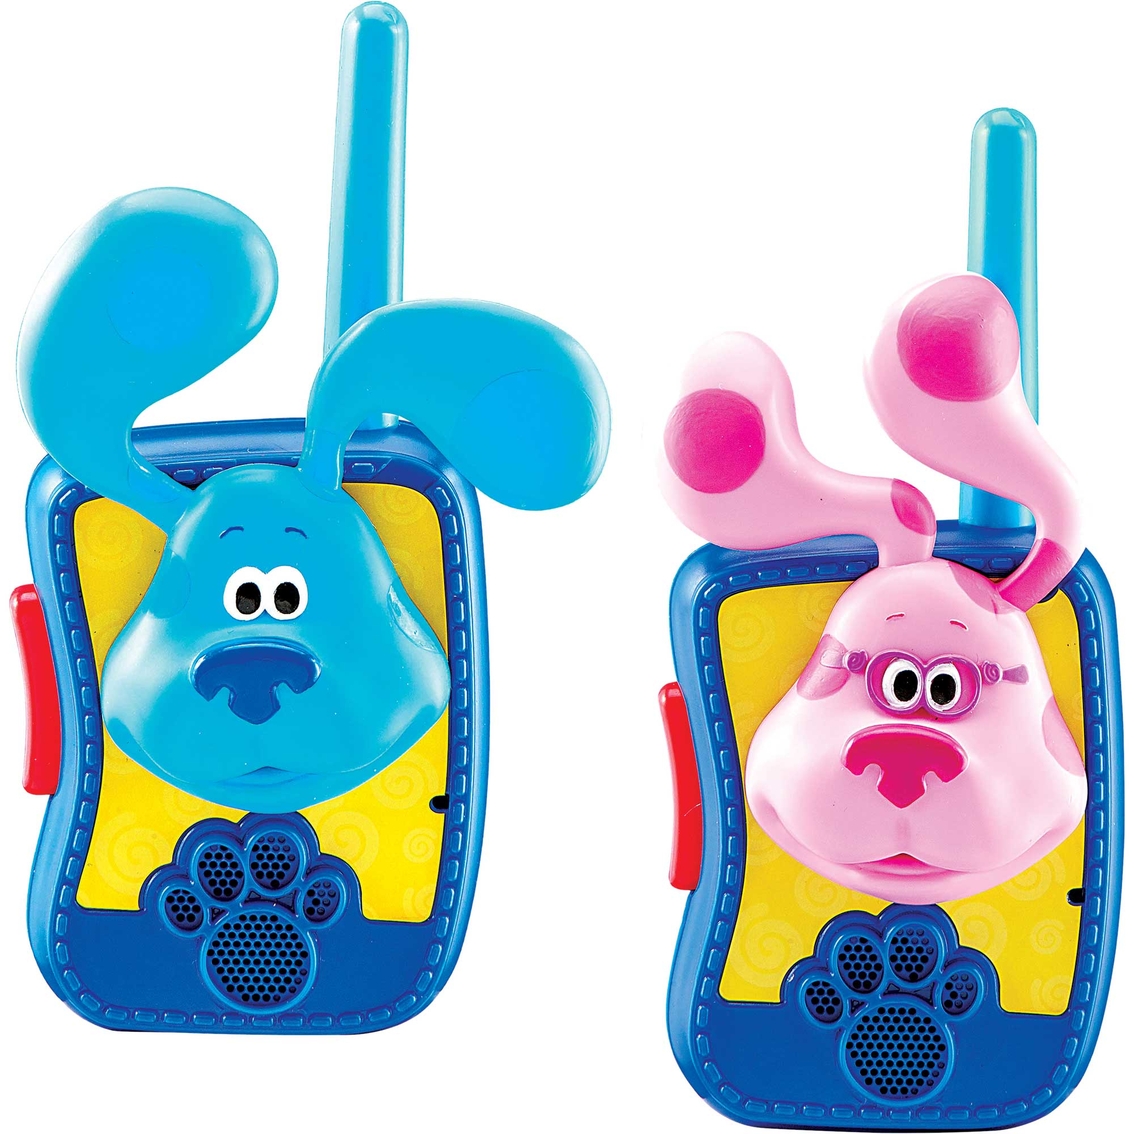 KIDdesigns Blue's Clues and You Walkie Talkies - Image 2 of 3